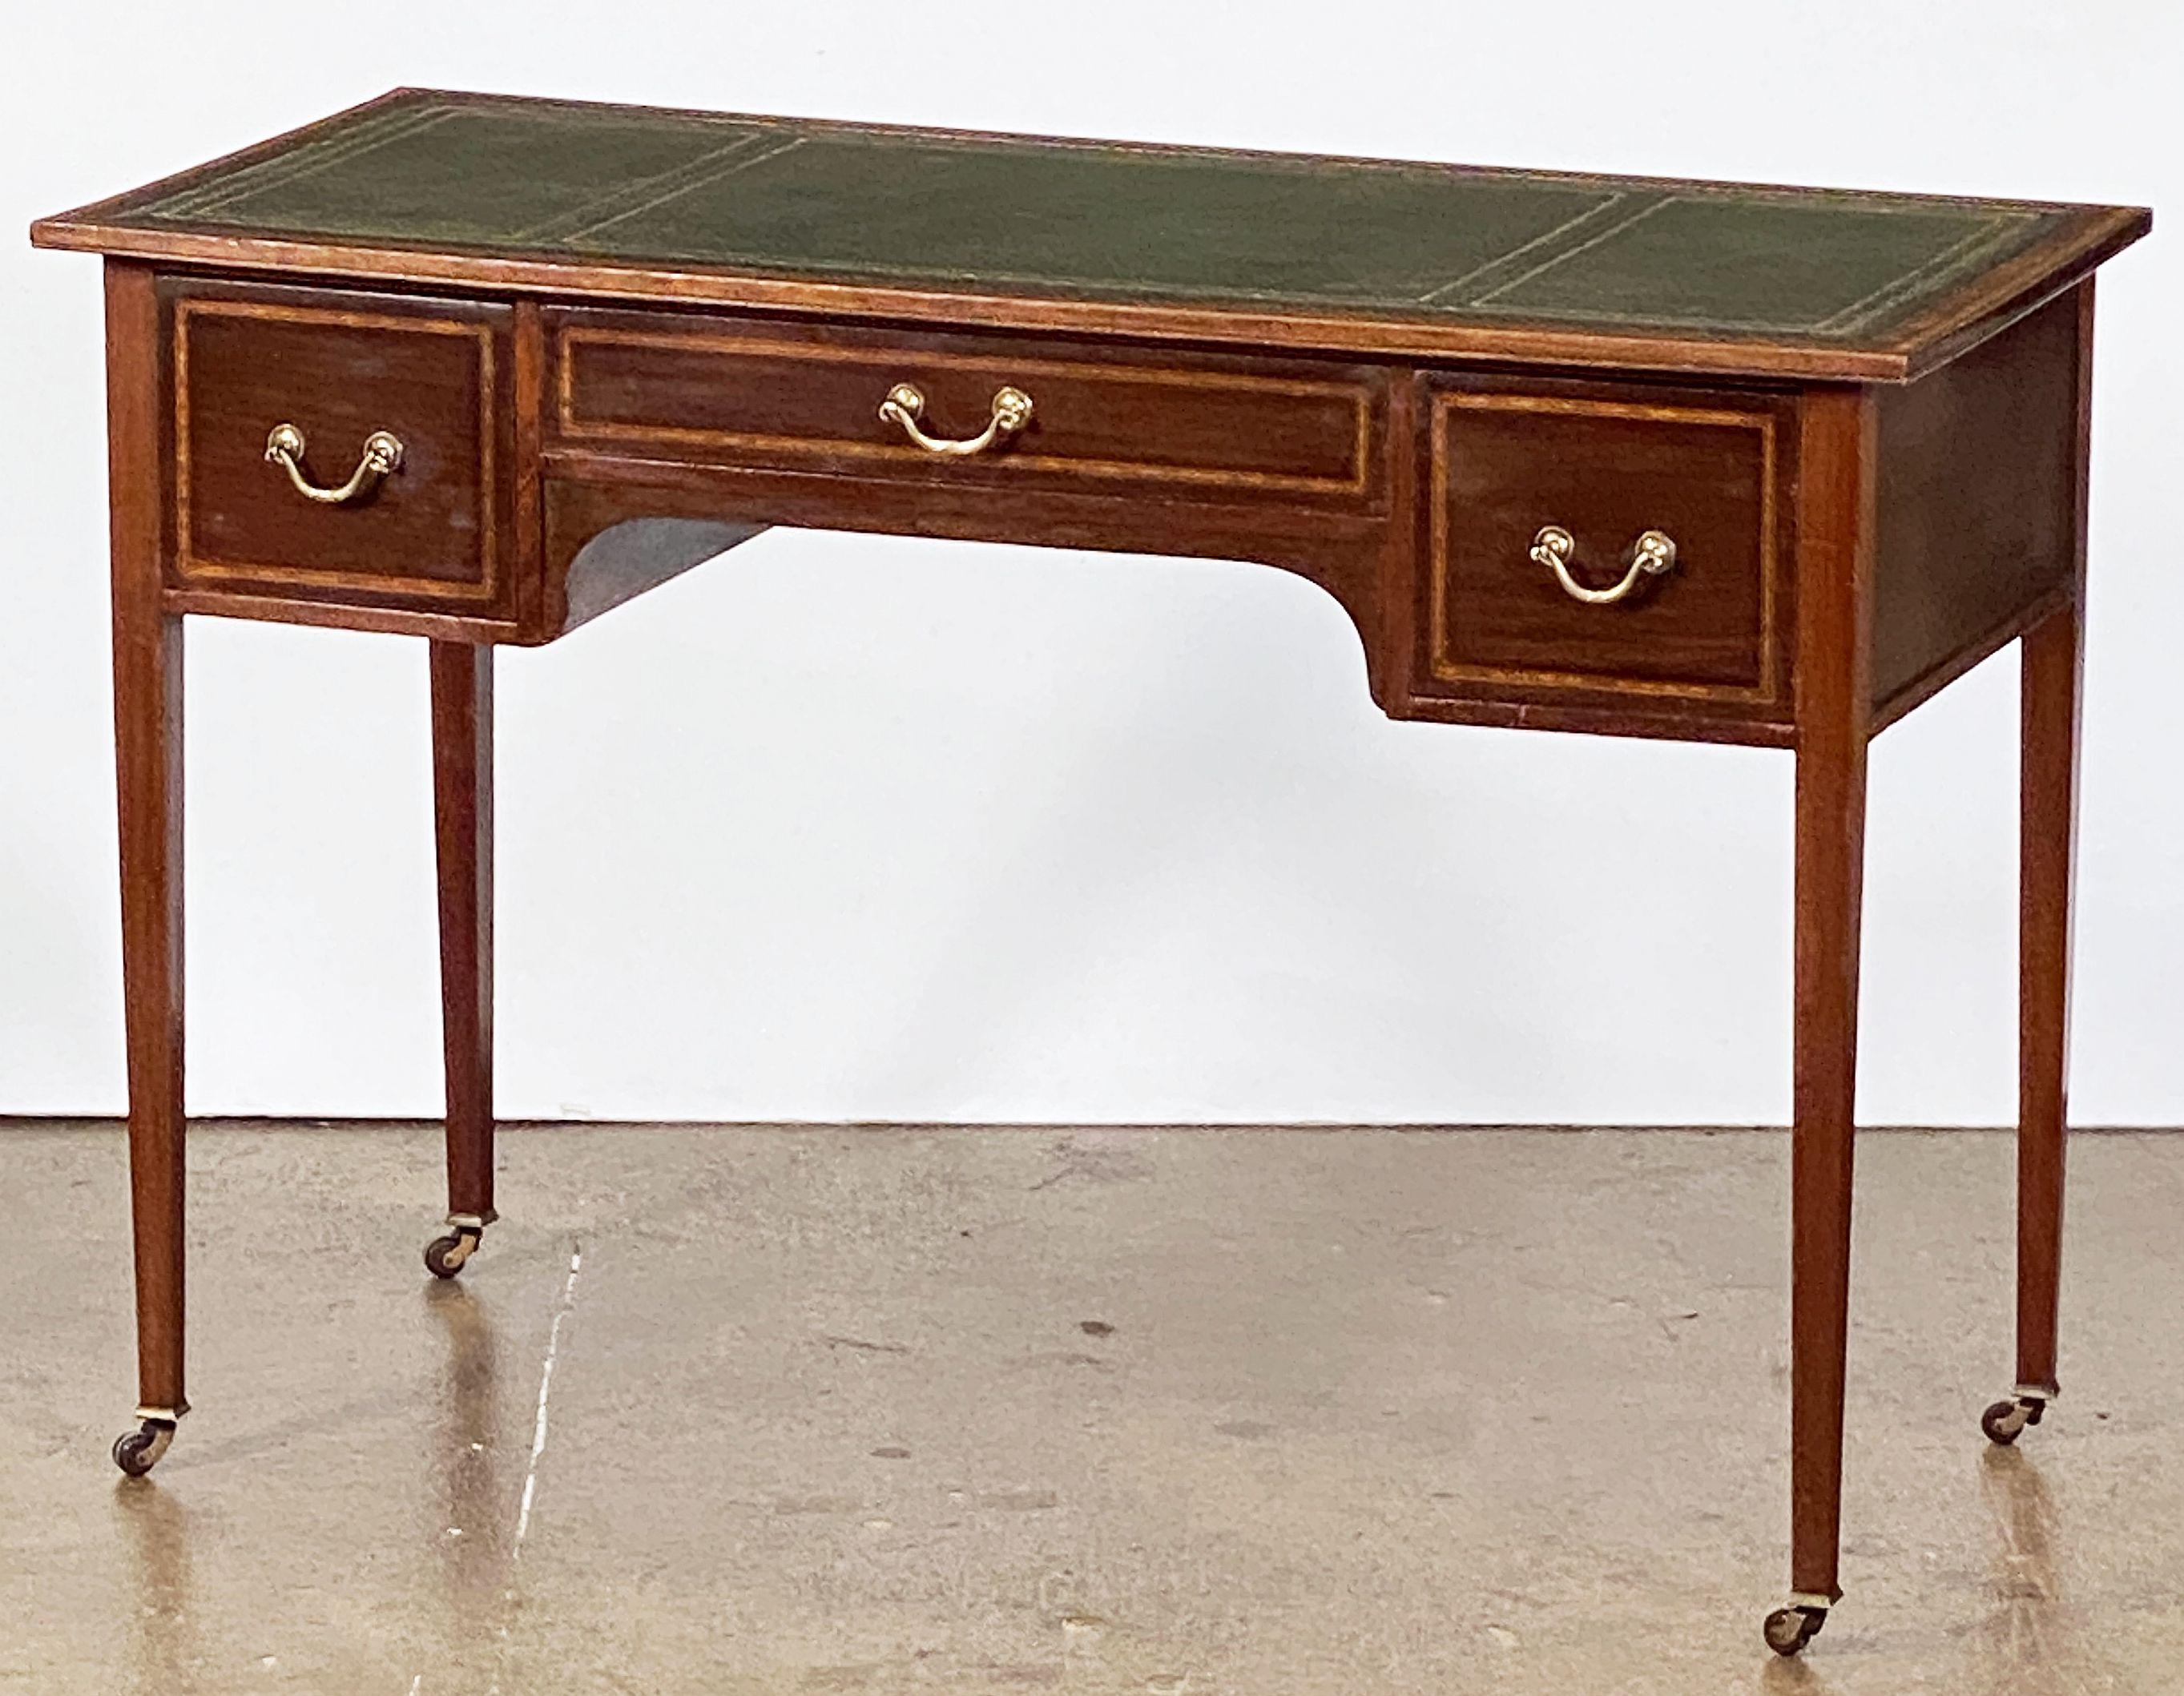 A fine English writing table or desk, featuring a moulded mahogany and gilt embossed green leather inset top with inlay around the facing edge, over a knee-hole frieze with three drawers, each with inlay and brass hardware, and set upon four tapered